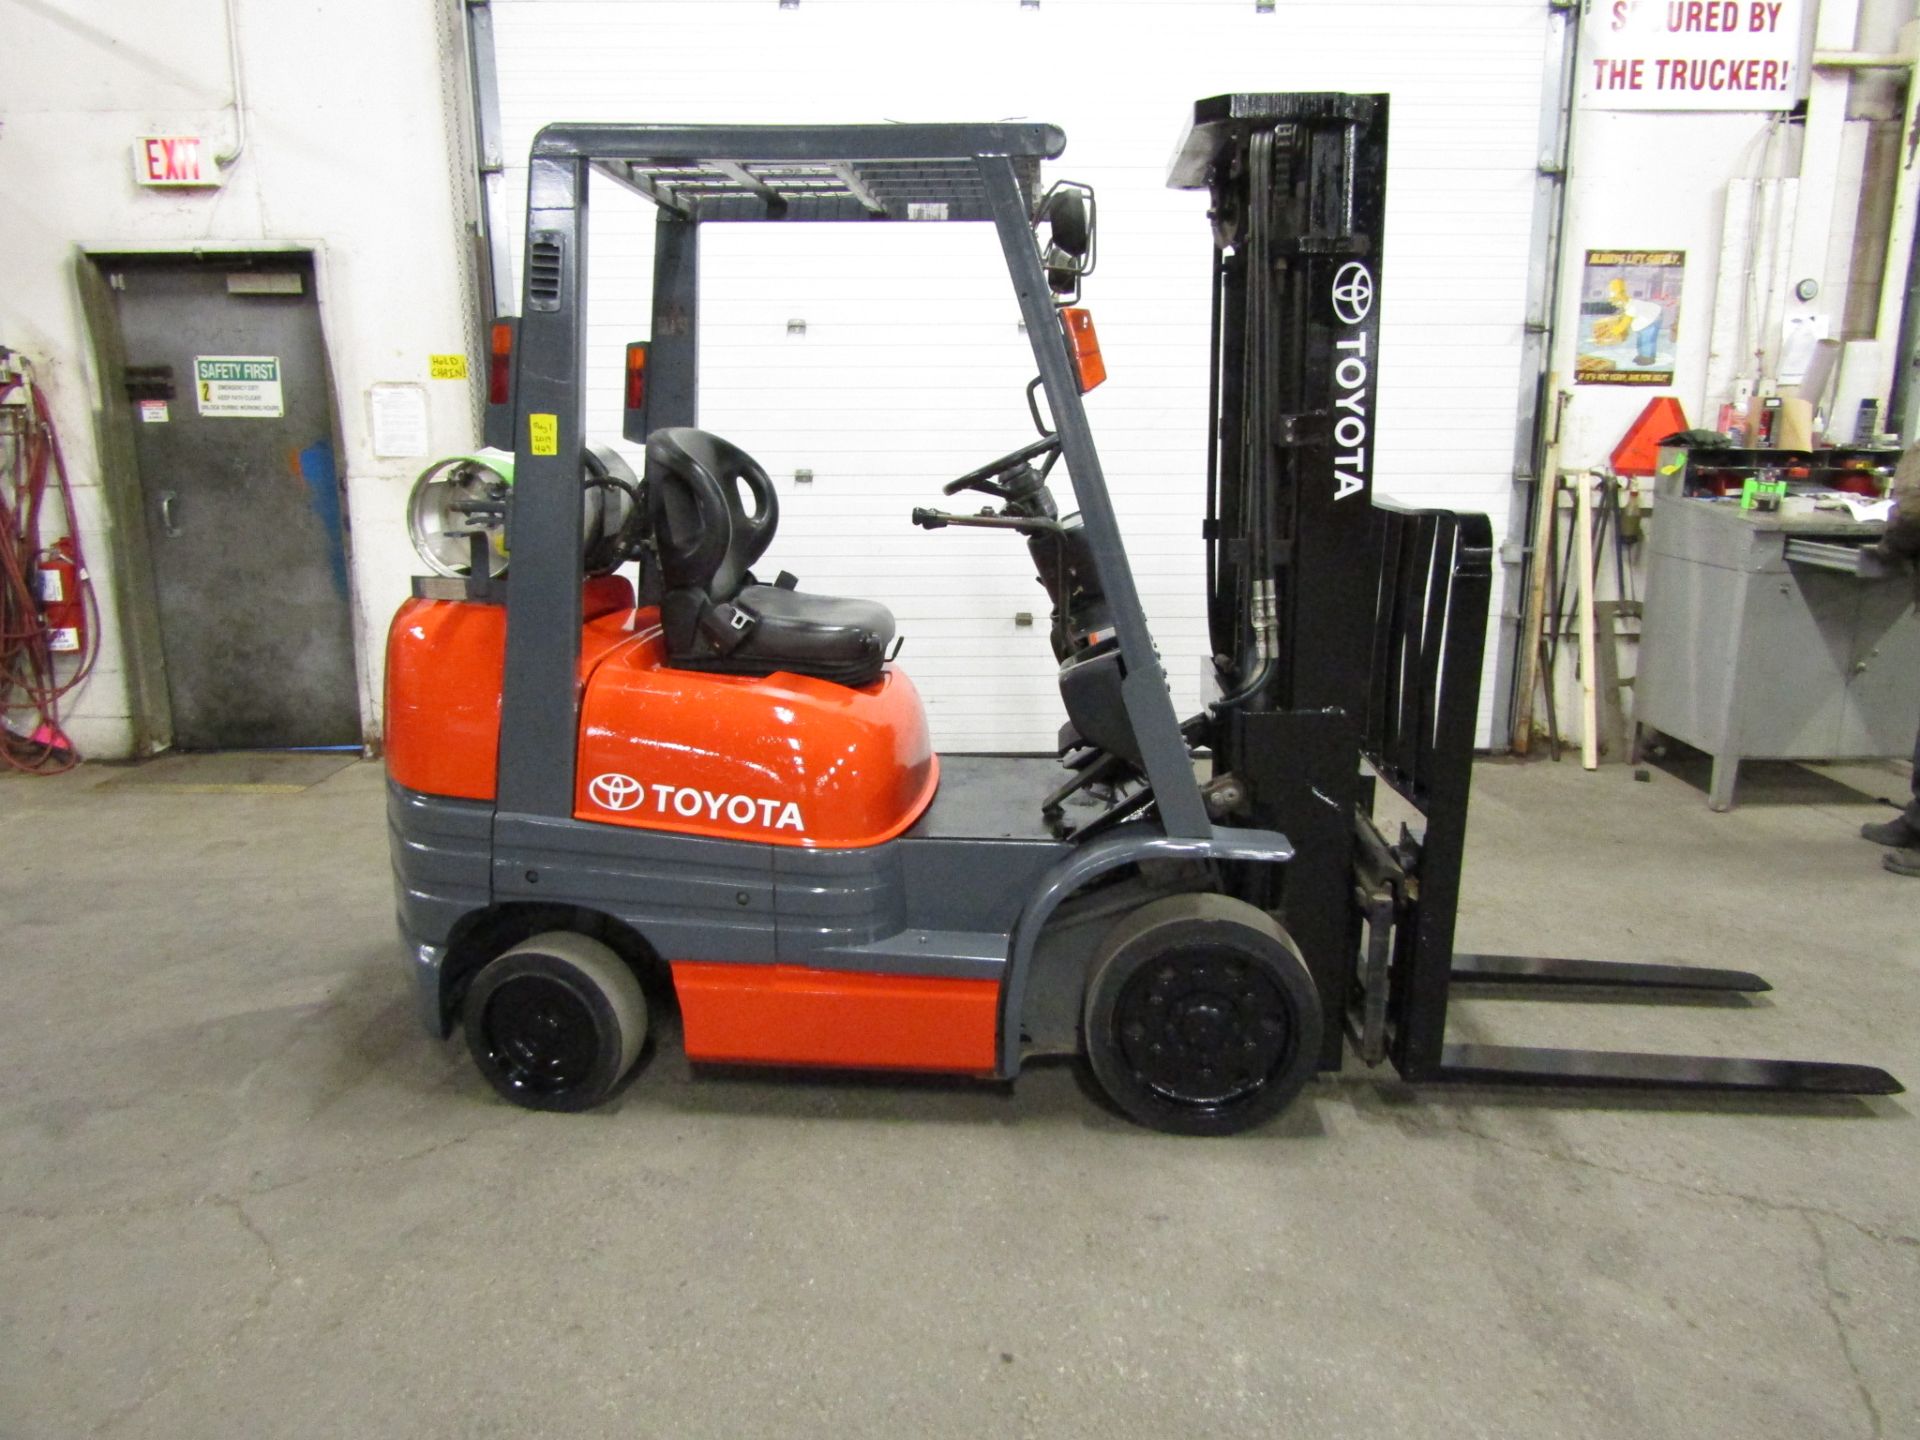 Toyota 5000lbs Capacity Forklift with 3-stage mast and sideshift - LPG (propane) (no propane tank